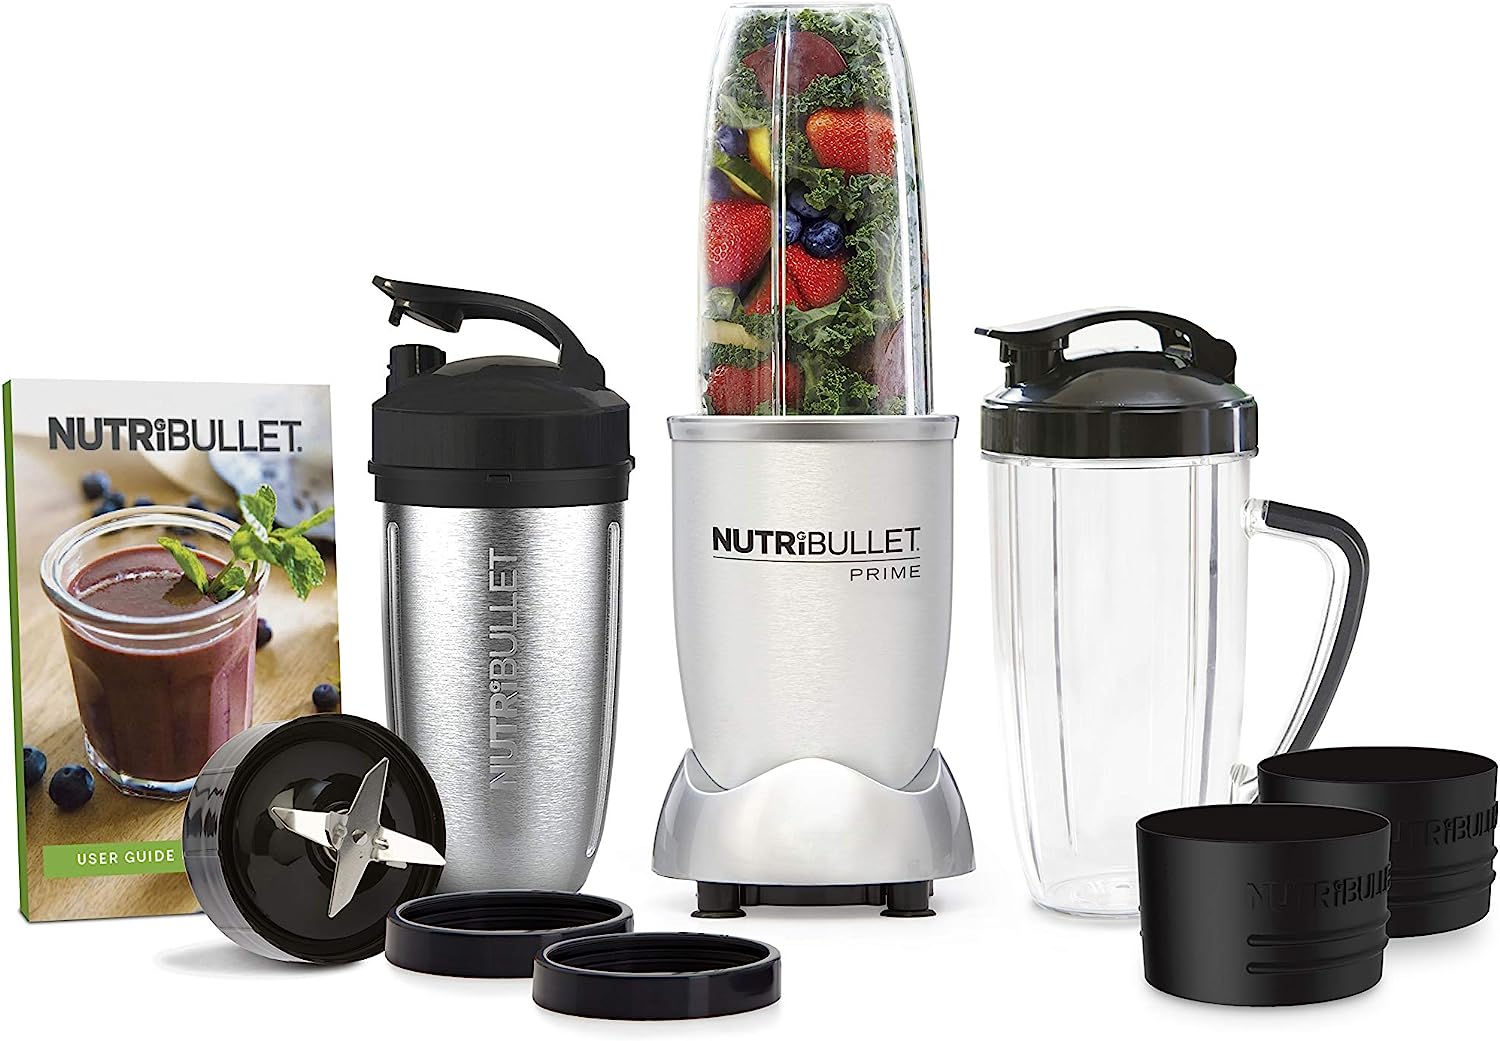 https://bigbigmart.com/wp-content/uploads/2023/08/NutriBullet-1000-Watt-PRIME-Edition-12-Piece-High-Speed-Blender-Mixer-System-Includes-Stainless-Steel-Insulated-Cup-and-Recipe-Book.jpg